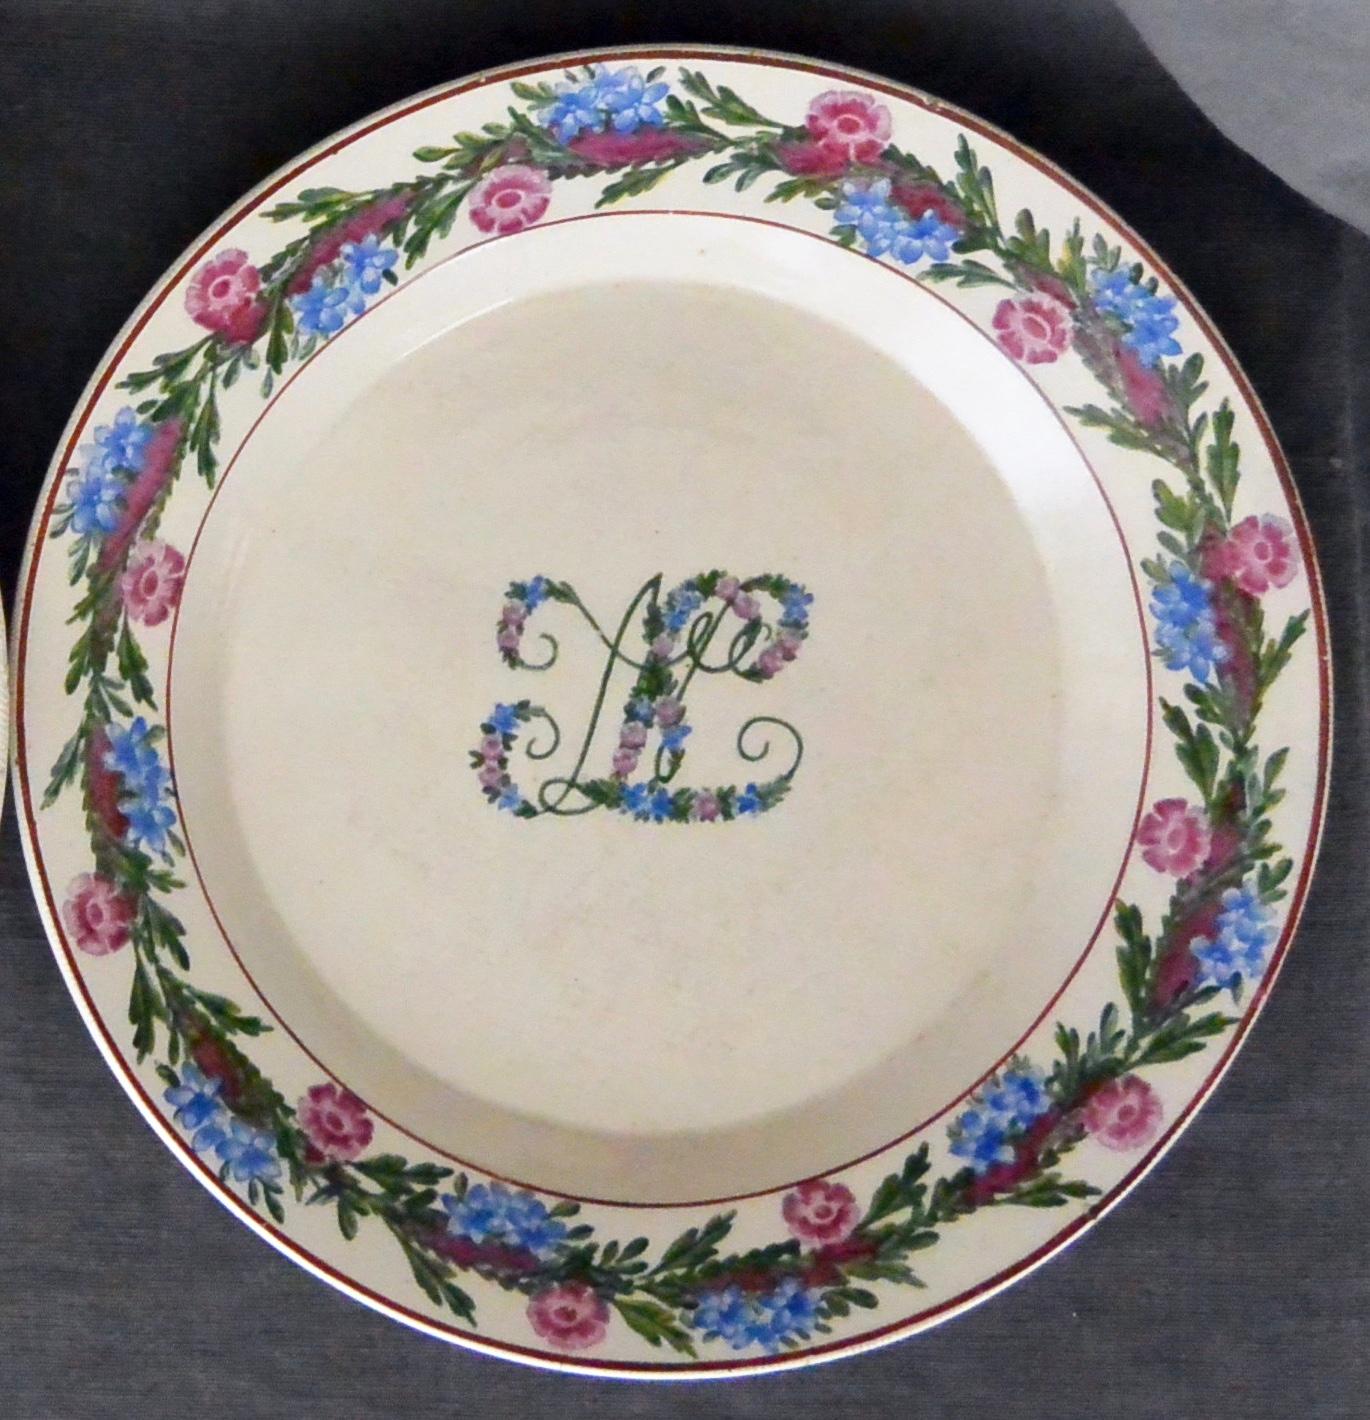 Pair of green, pink and blue floral banded plates. Antique creamware soup and under-plate with jewel-tone floral banding and monogram; with impressed marks for Giustiniani Naples, Italy, late 18th century.
Dimension: Soup plate 9.5' diameter x 1.5